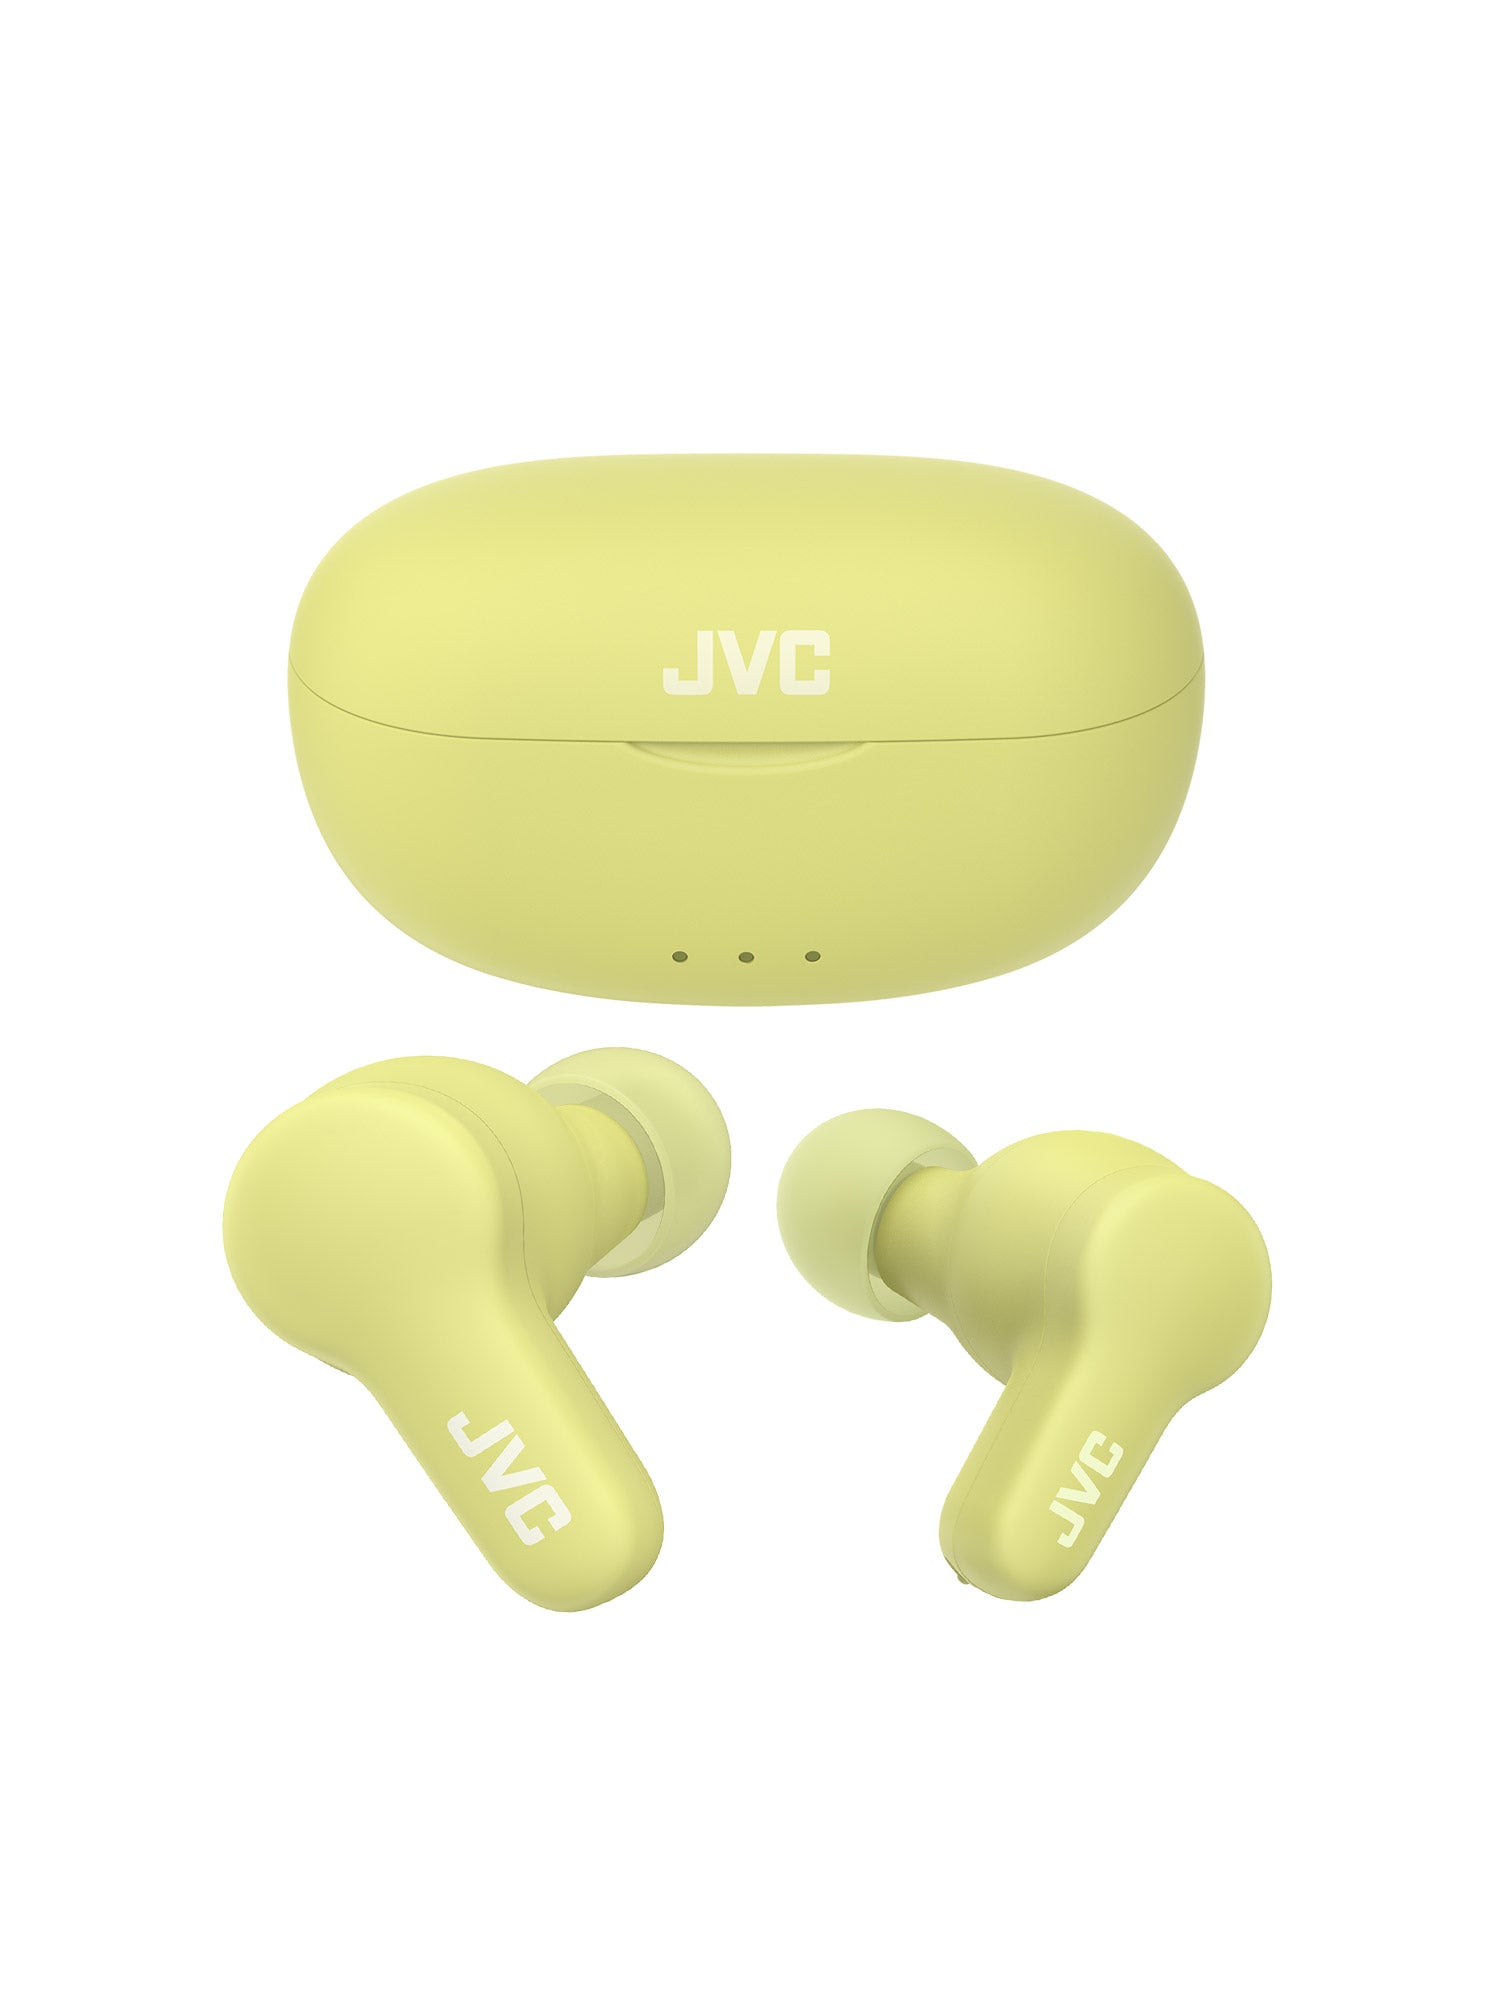 HA-A7T2 in green wireless earbuds and charging case by JVC